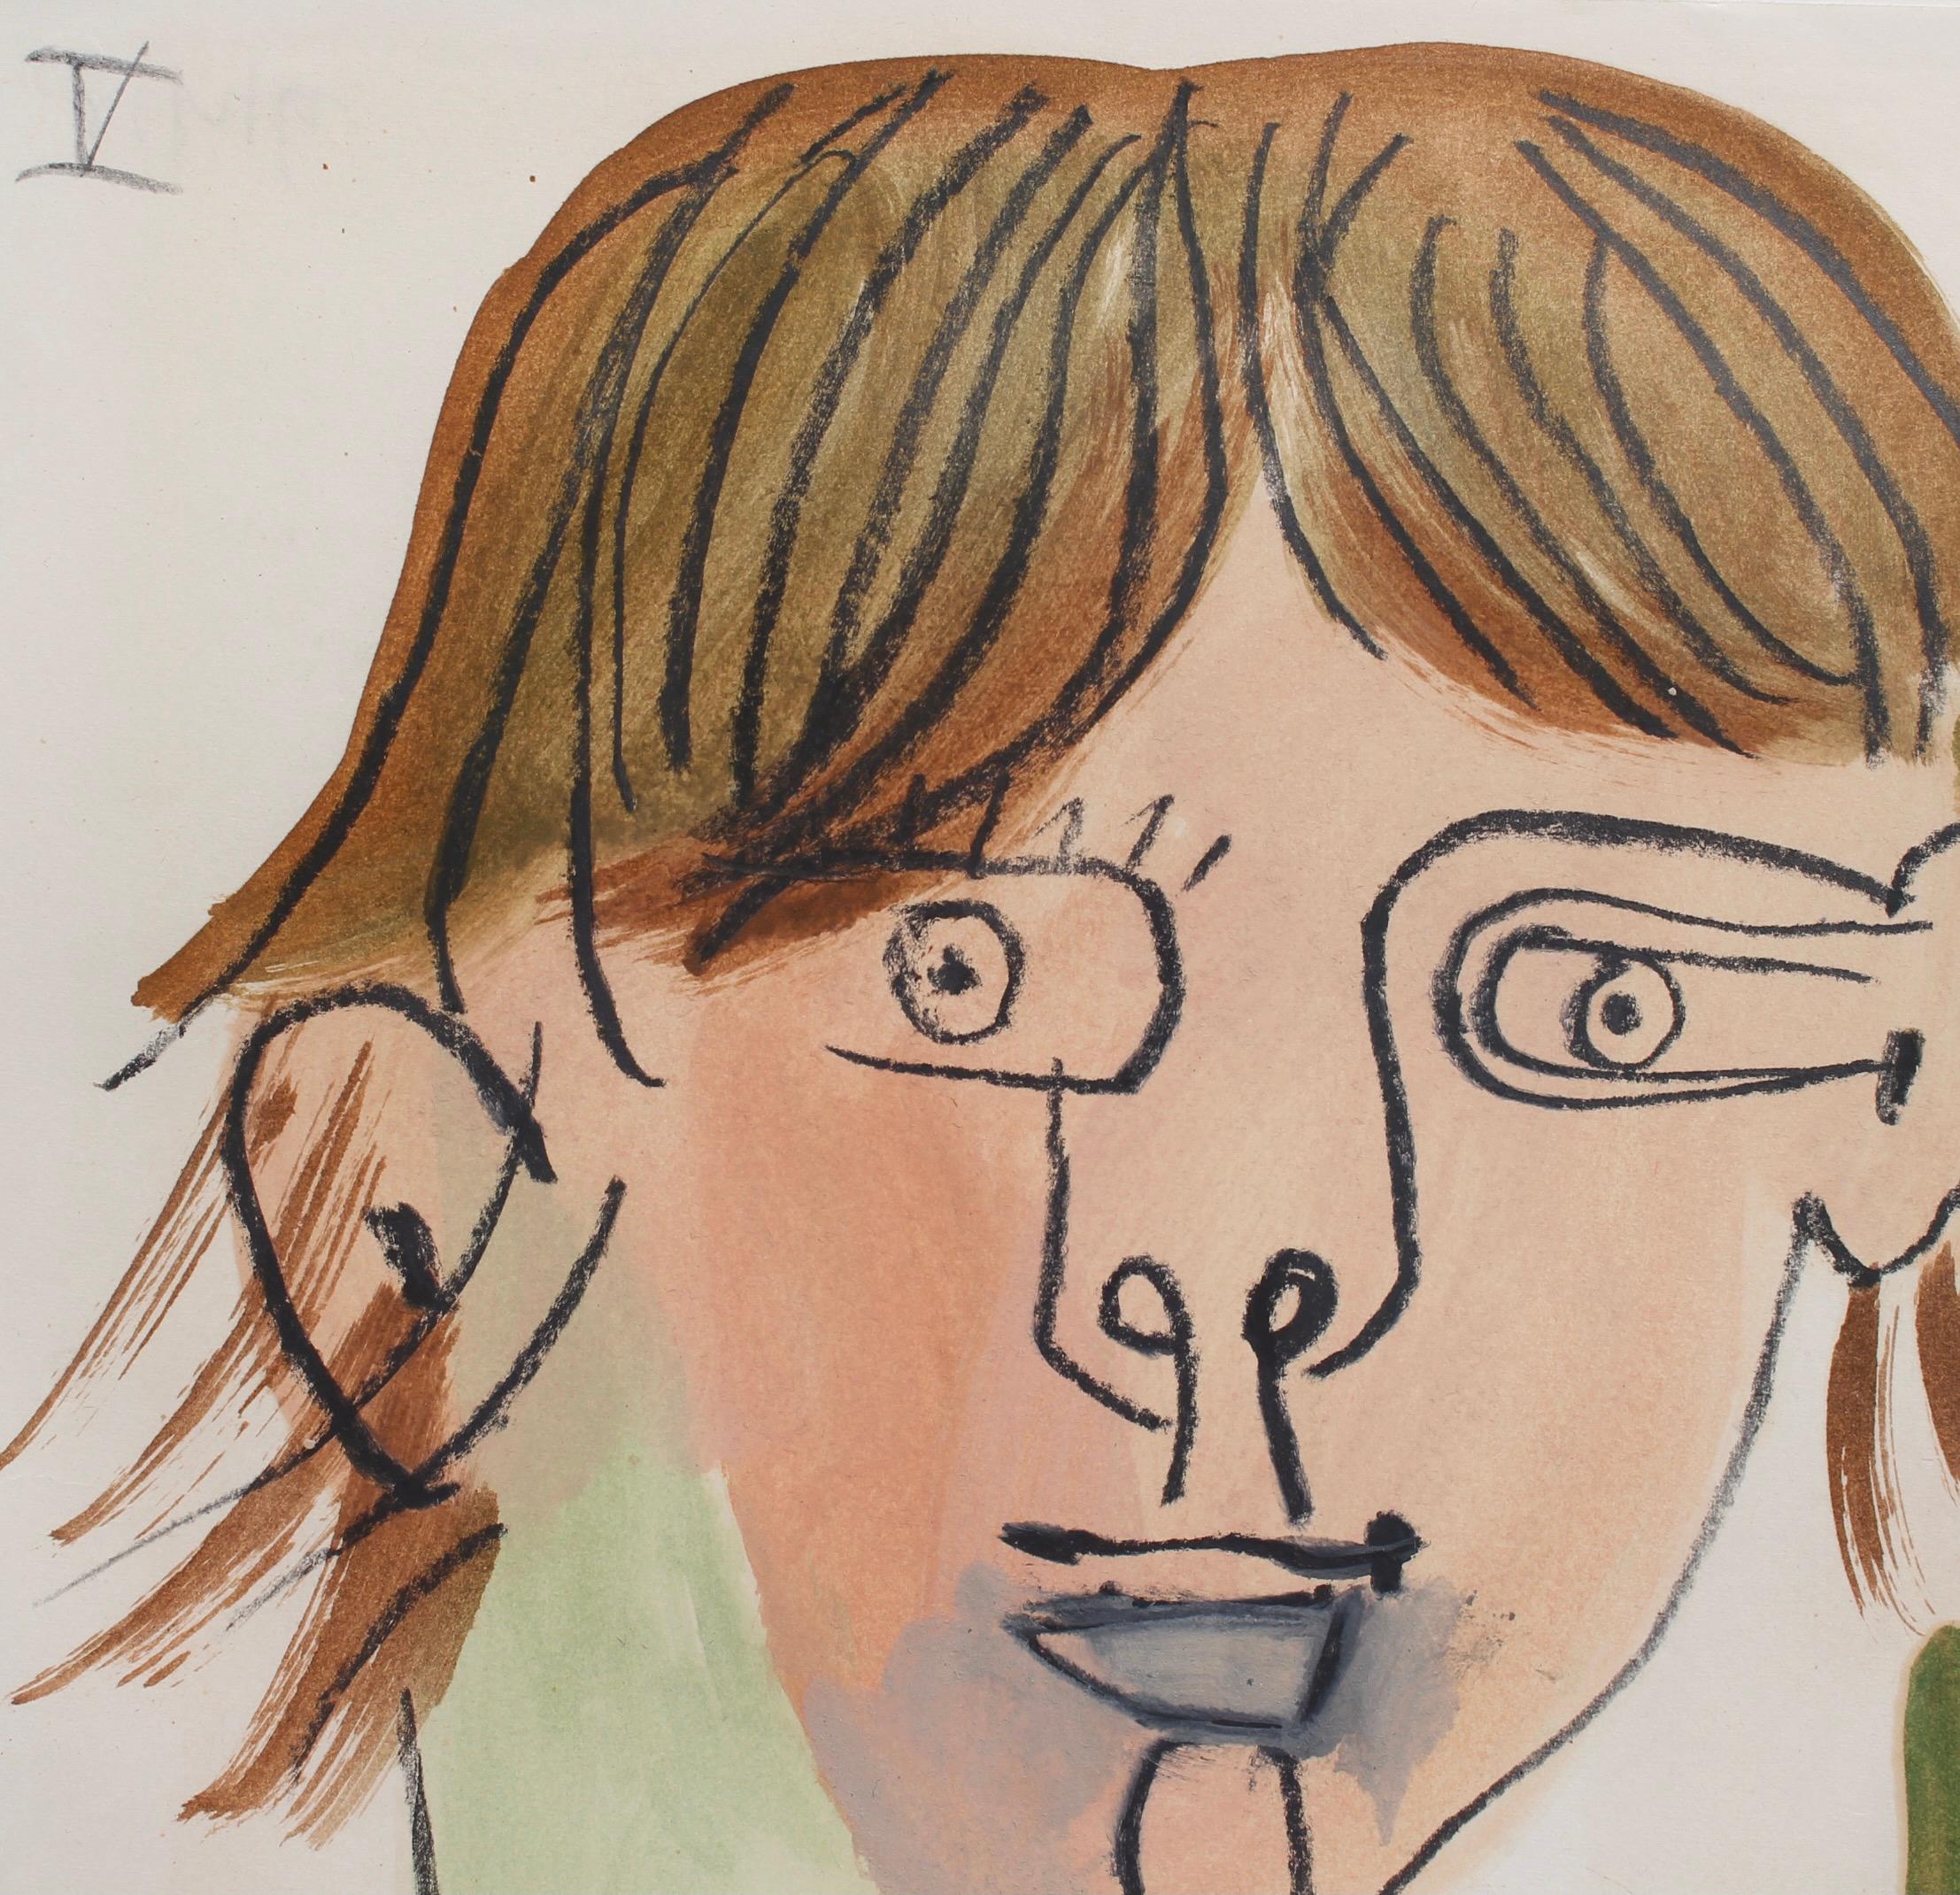 'Portrait of a Boy', India ink and gouache on paper (1966), by Raymond Debiève. A portrait of a boy seemingly in his awkward teen phase who sports the hairstyle of the era. He is bright-eyed with a curious expression. The kind of expression young